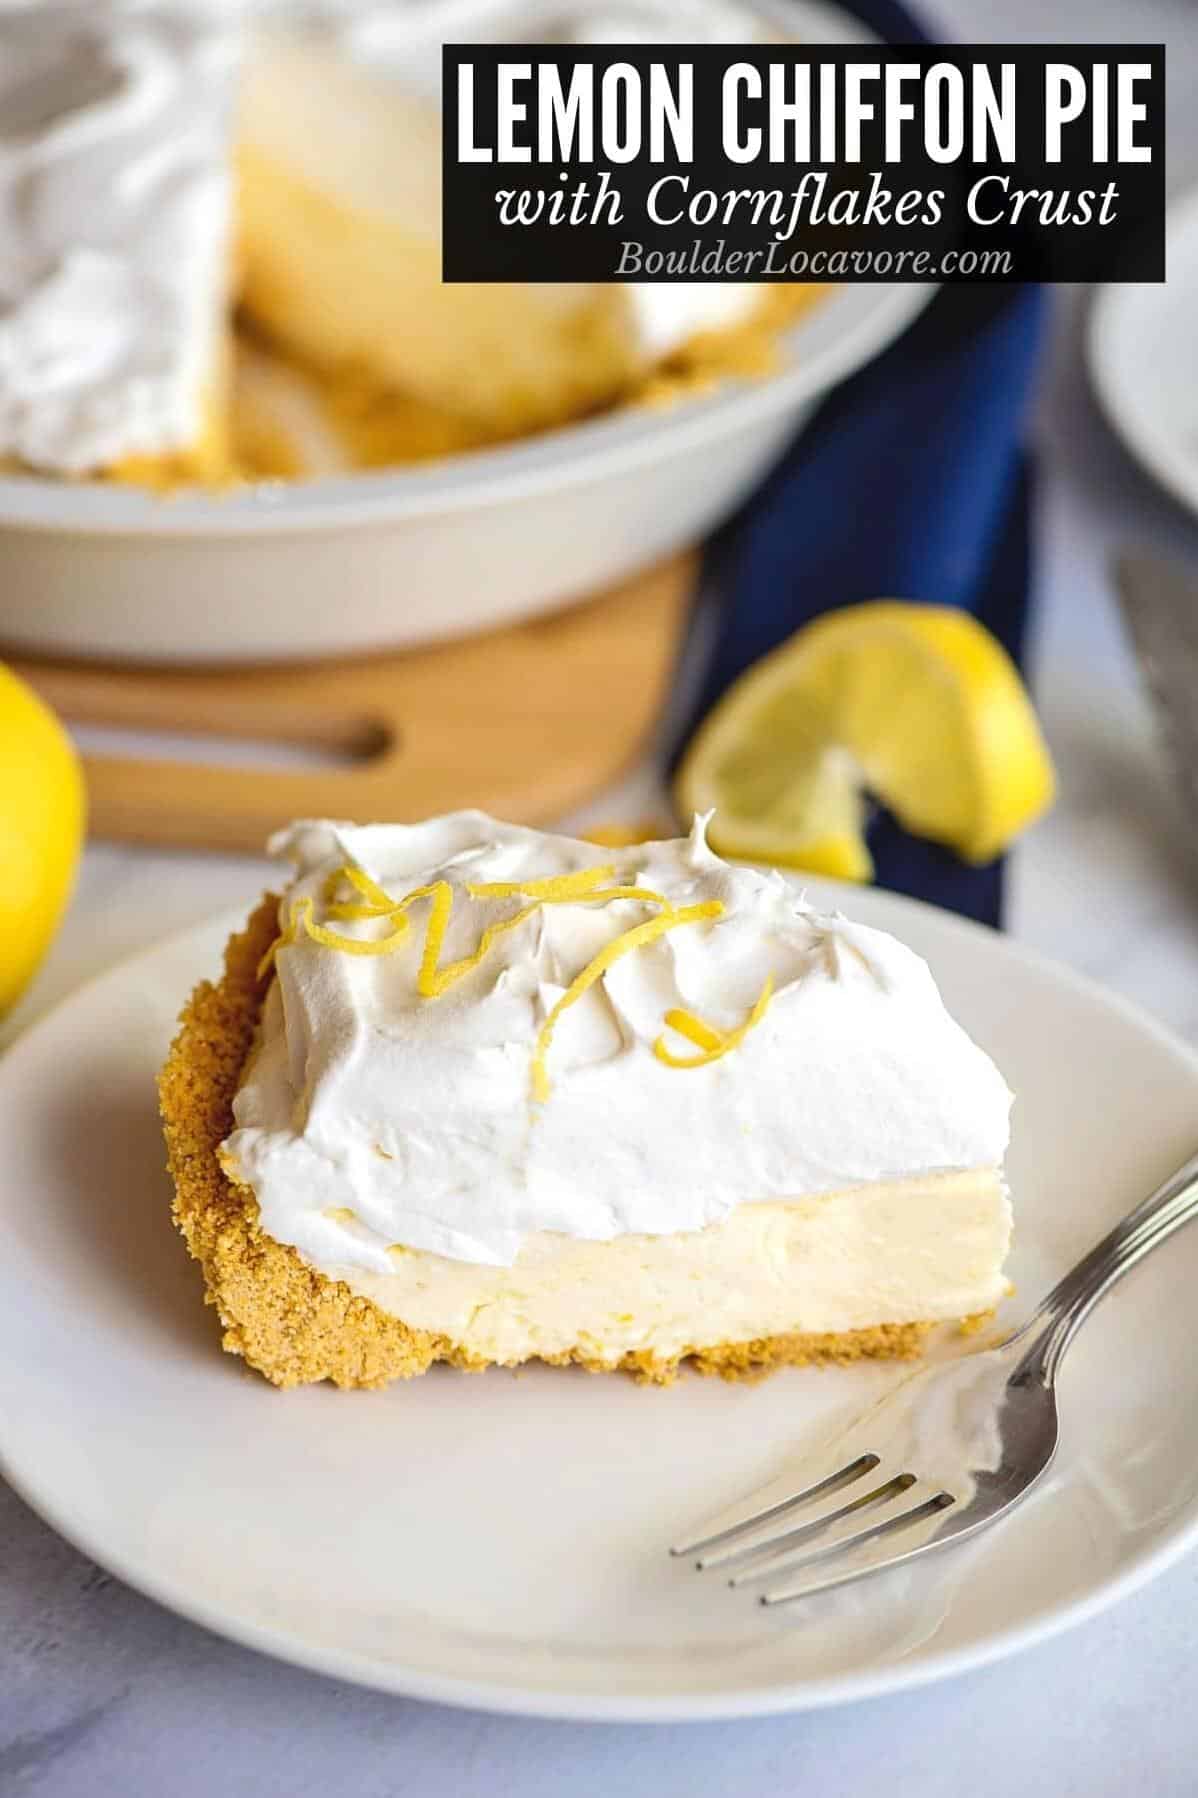  A forkful of Lemon Chiffon Pie melting in your mouth.